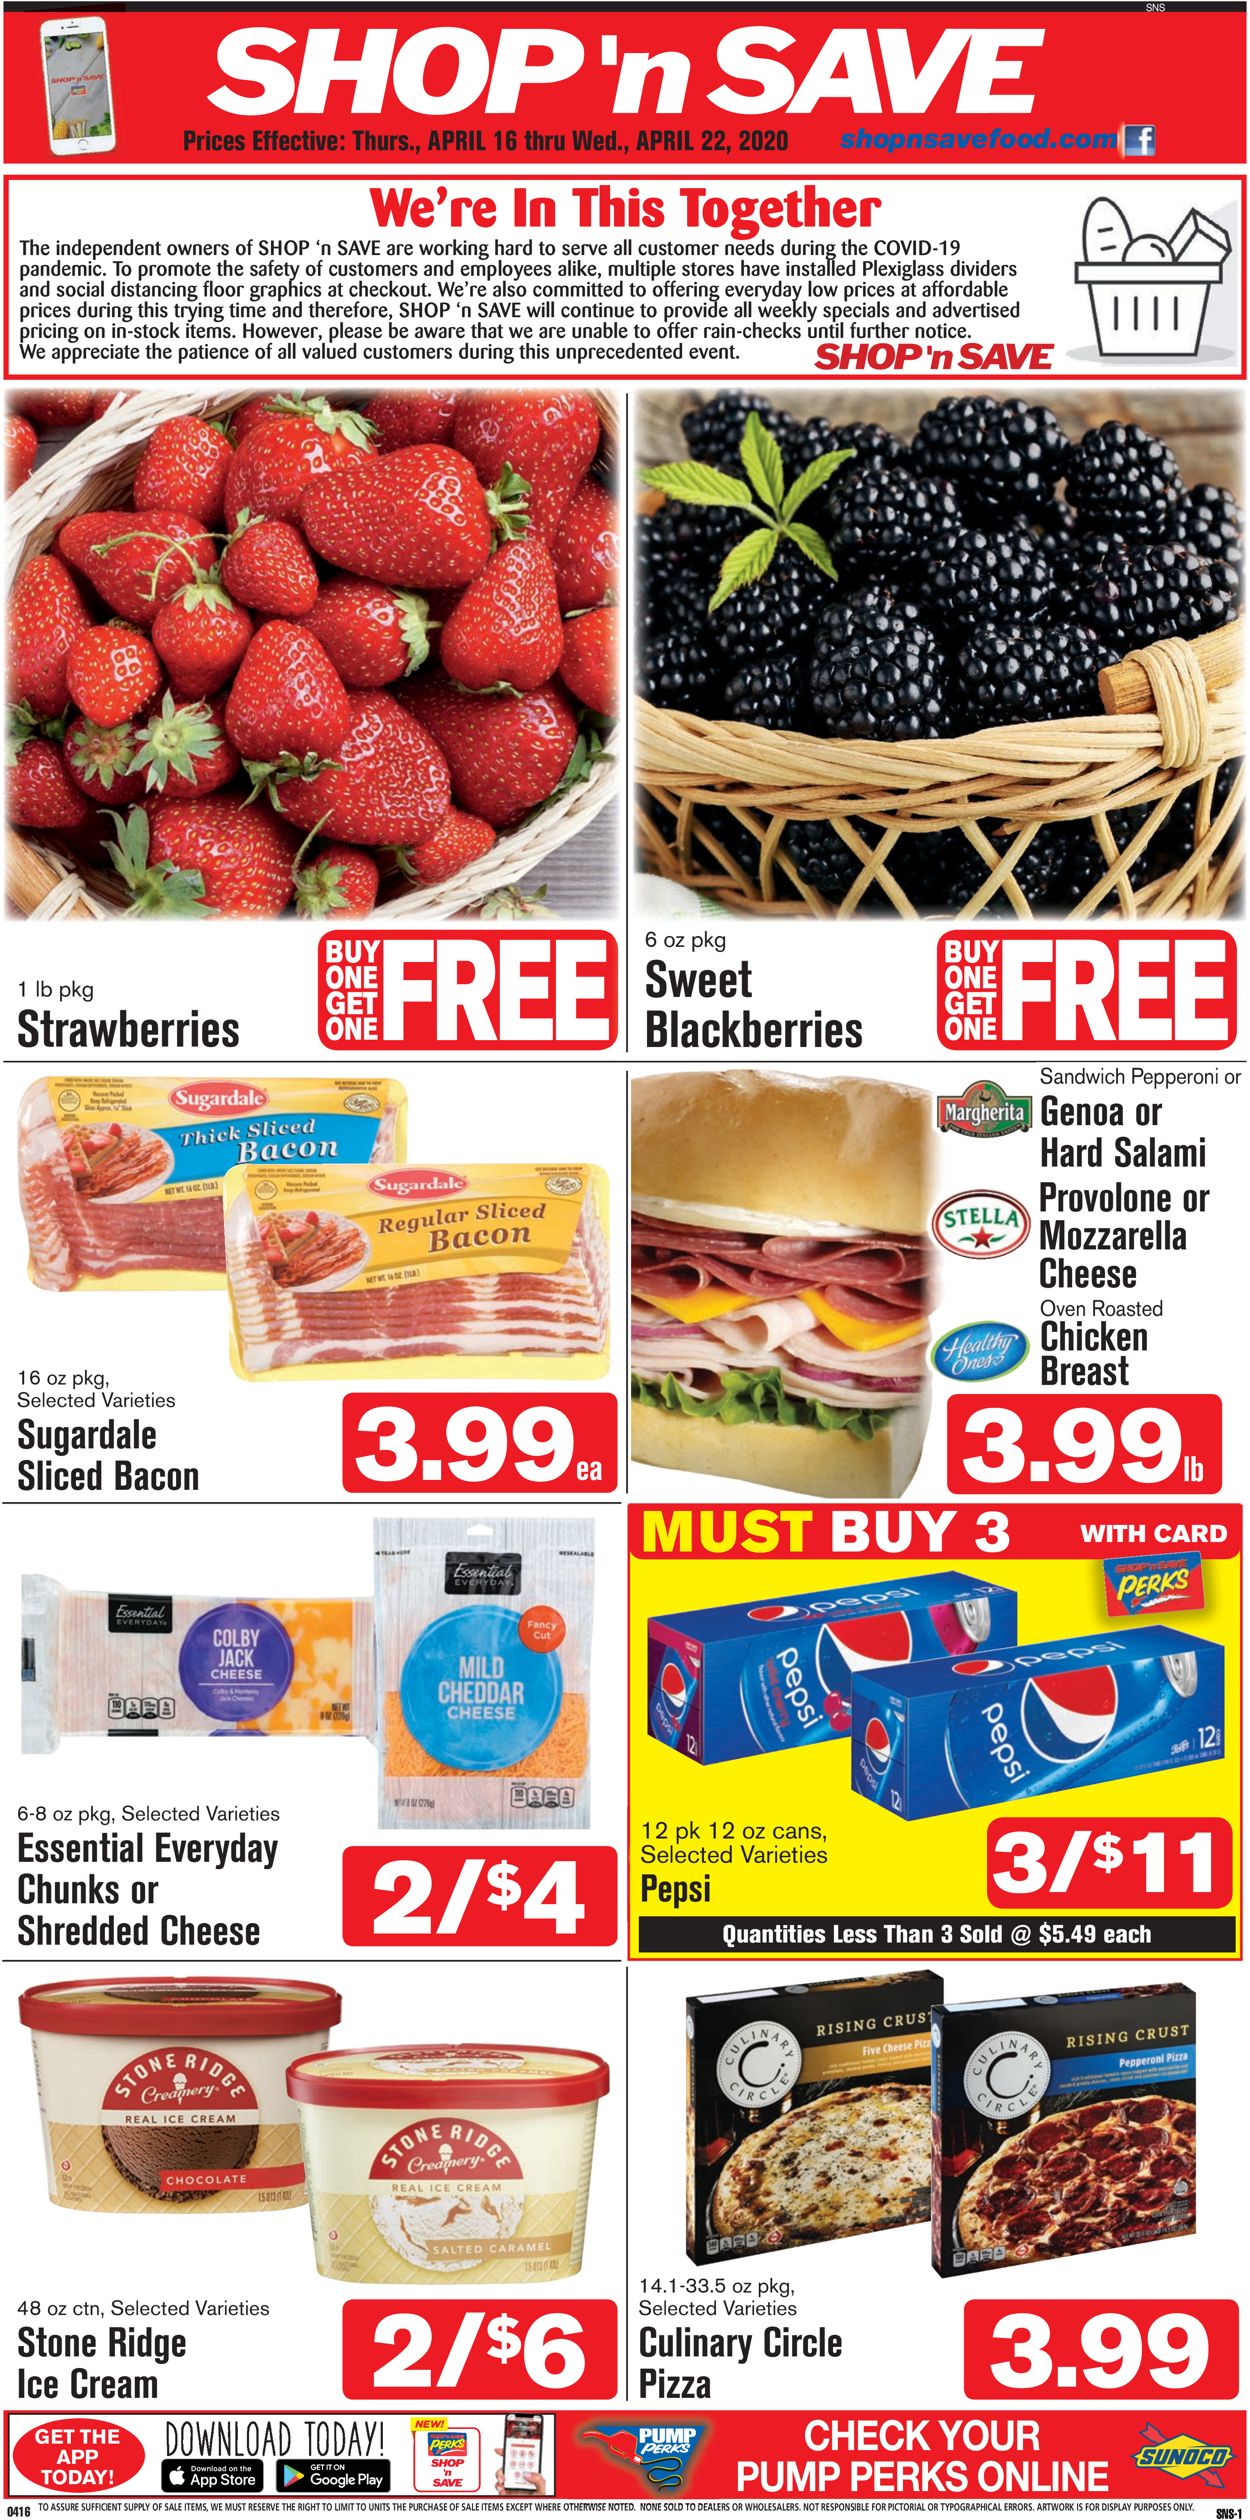 Shop ‘n Save Current weekly ad 04/16 04/22/2020